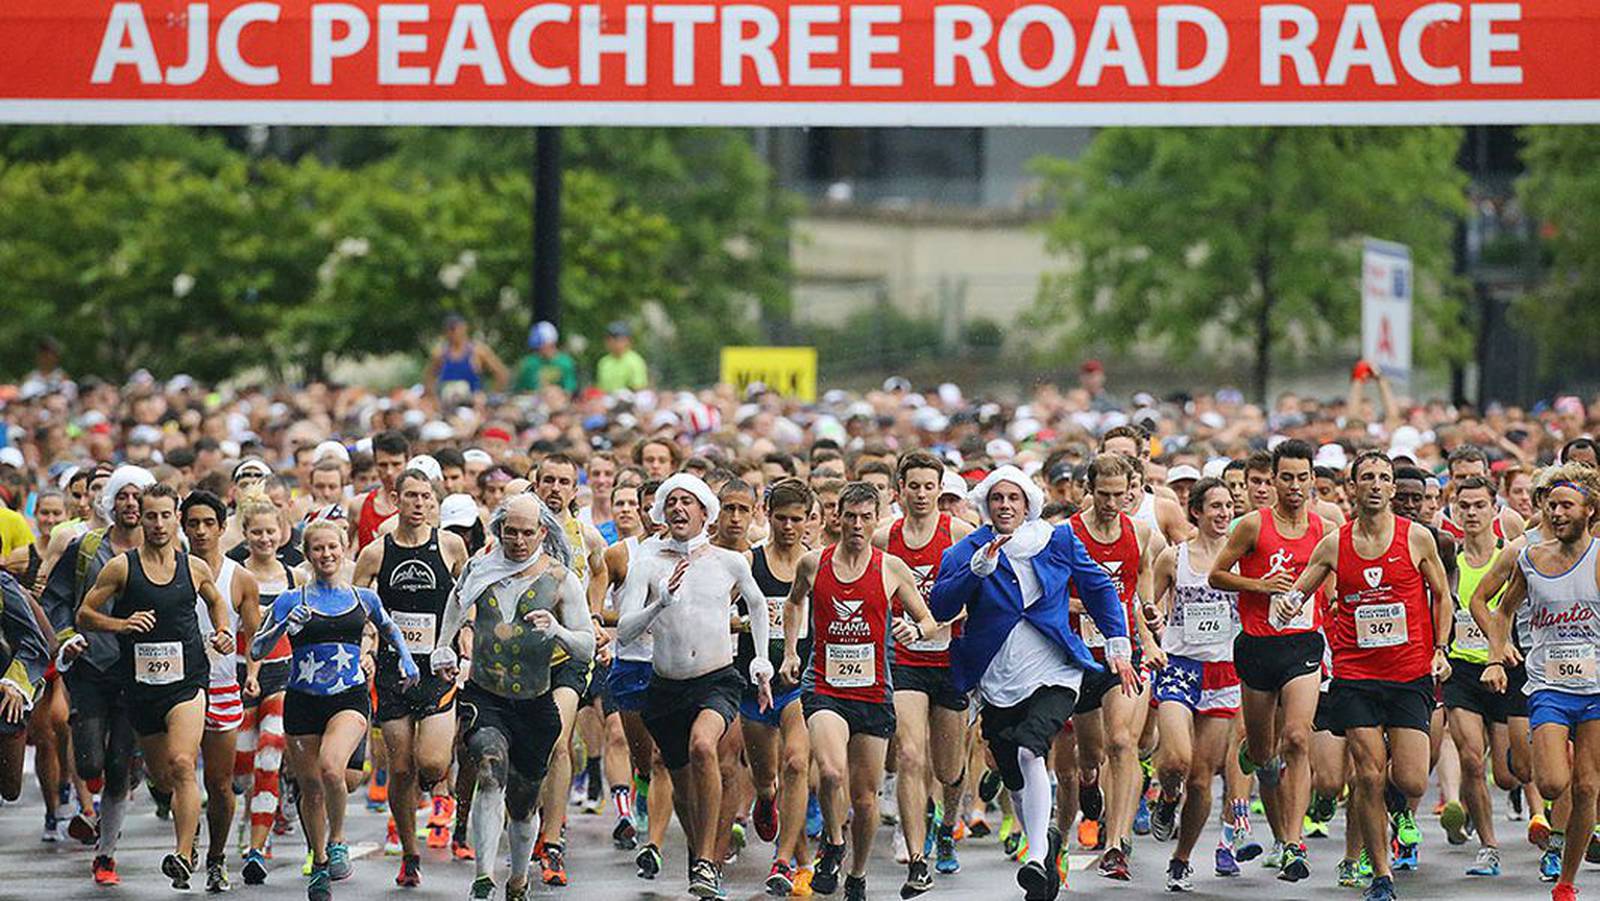 AJC Peachtree Road Race List of road closures planned for the event